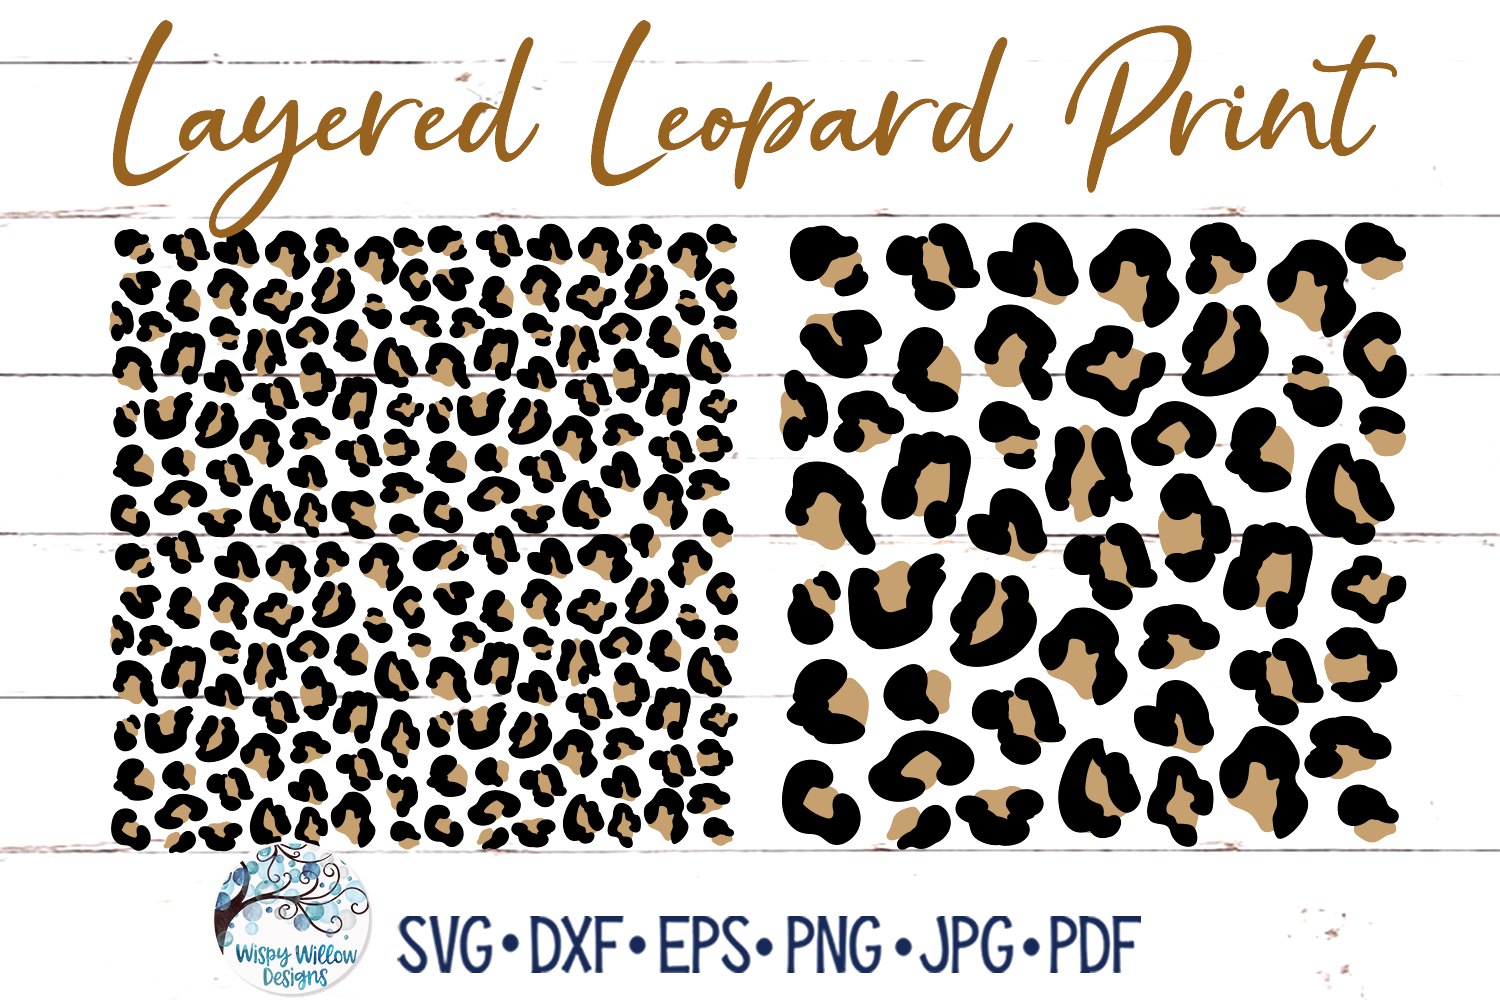 Layered Leopard Print SVGs Wispy Willow Designs Company